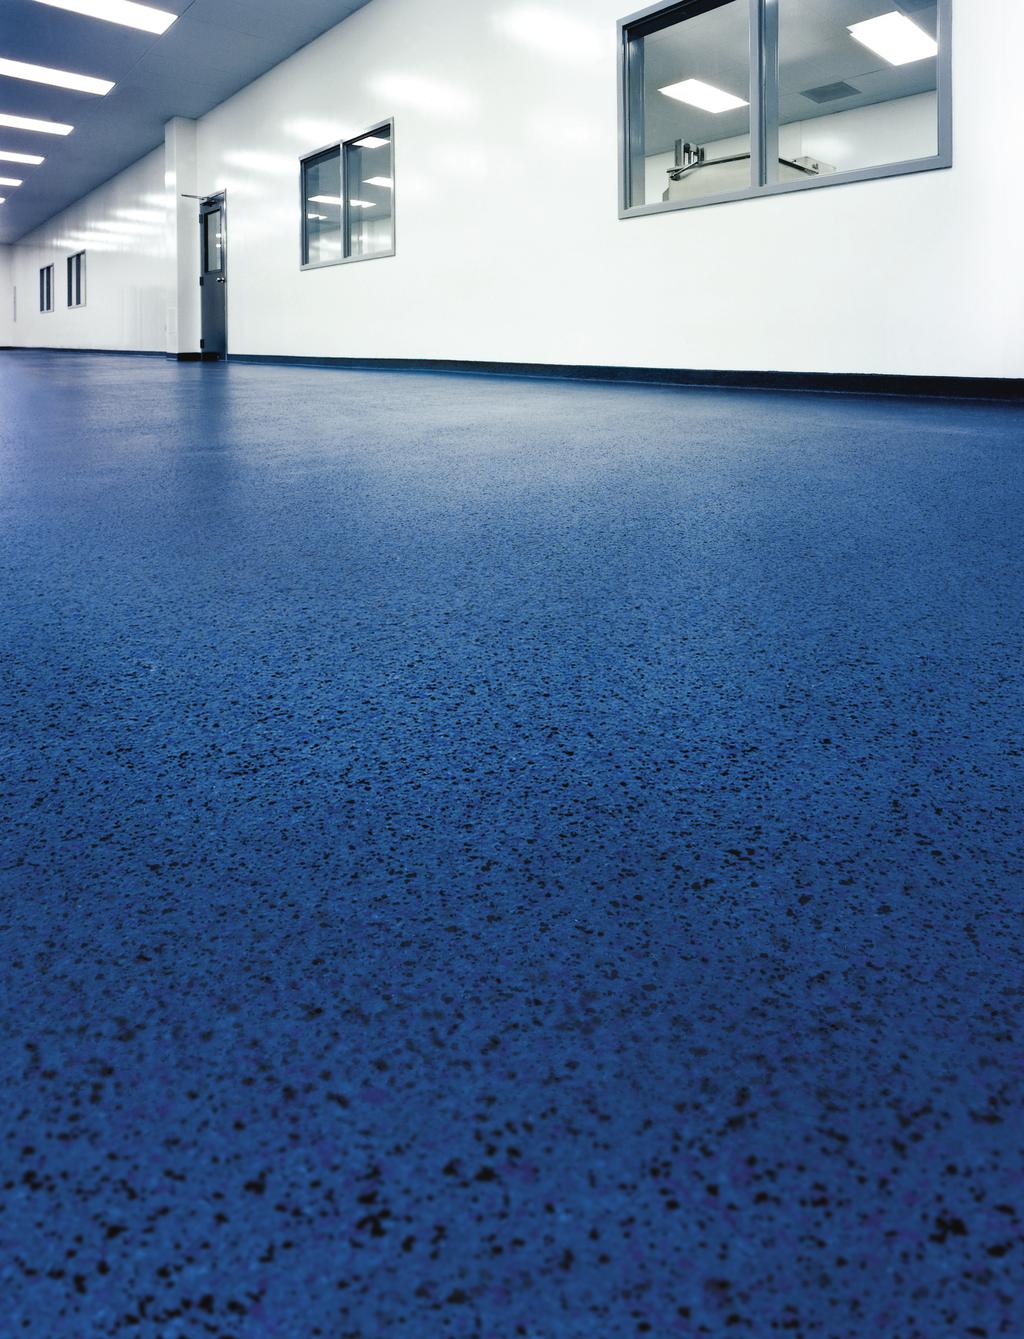 MasterTop SRS seamless flooring systems fully cure in one hour, and are